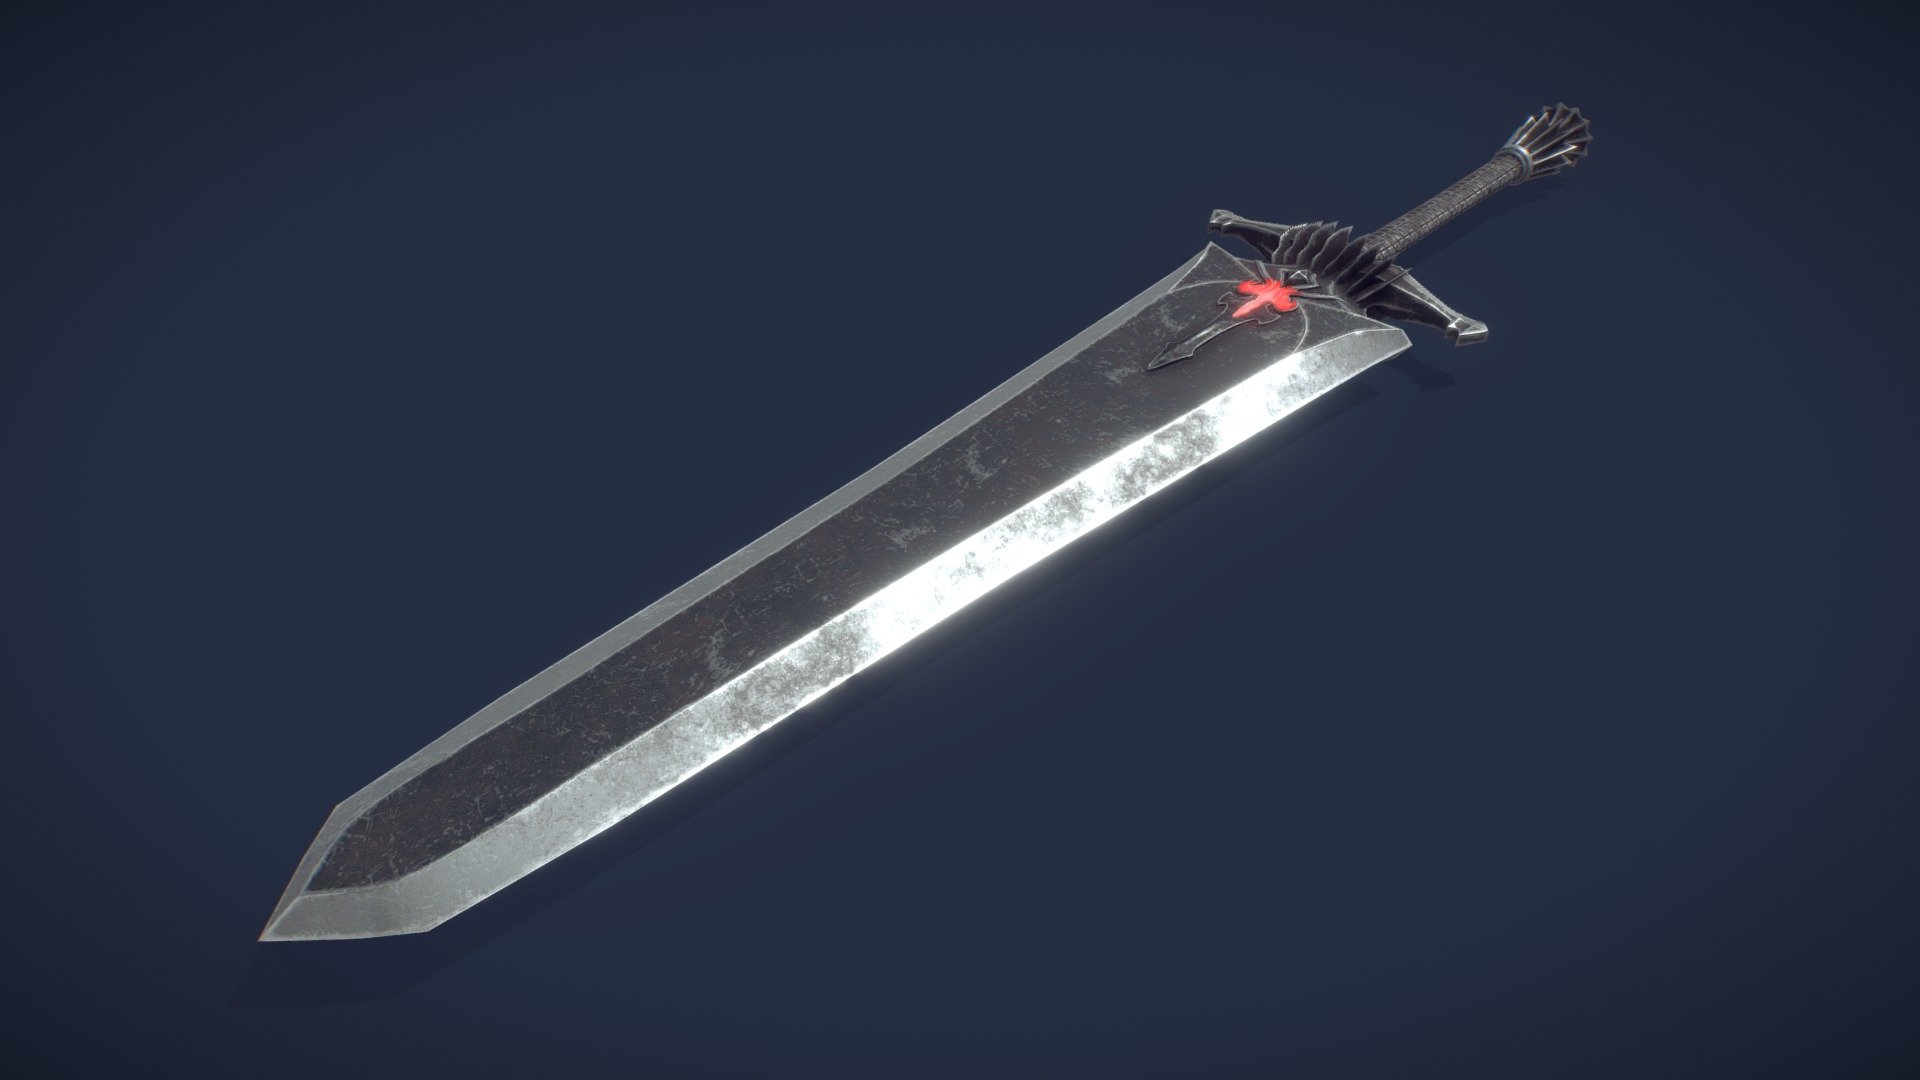 Just a fantasy sword made based on concept from network (Final Fantasy 14) - Sword based on Final Fantasy 14 - 3D model by Sir Erdees (@sirerdees) 3d model